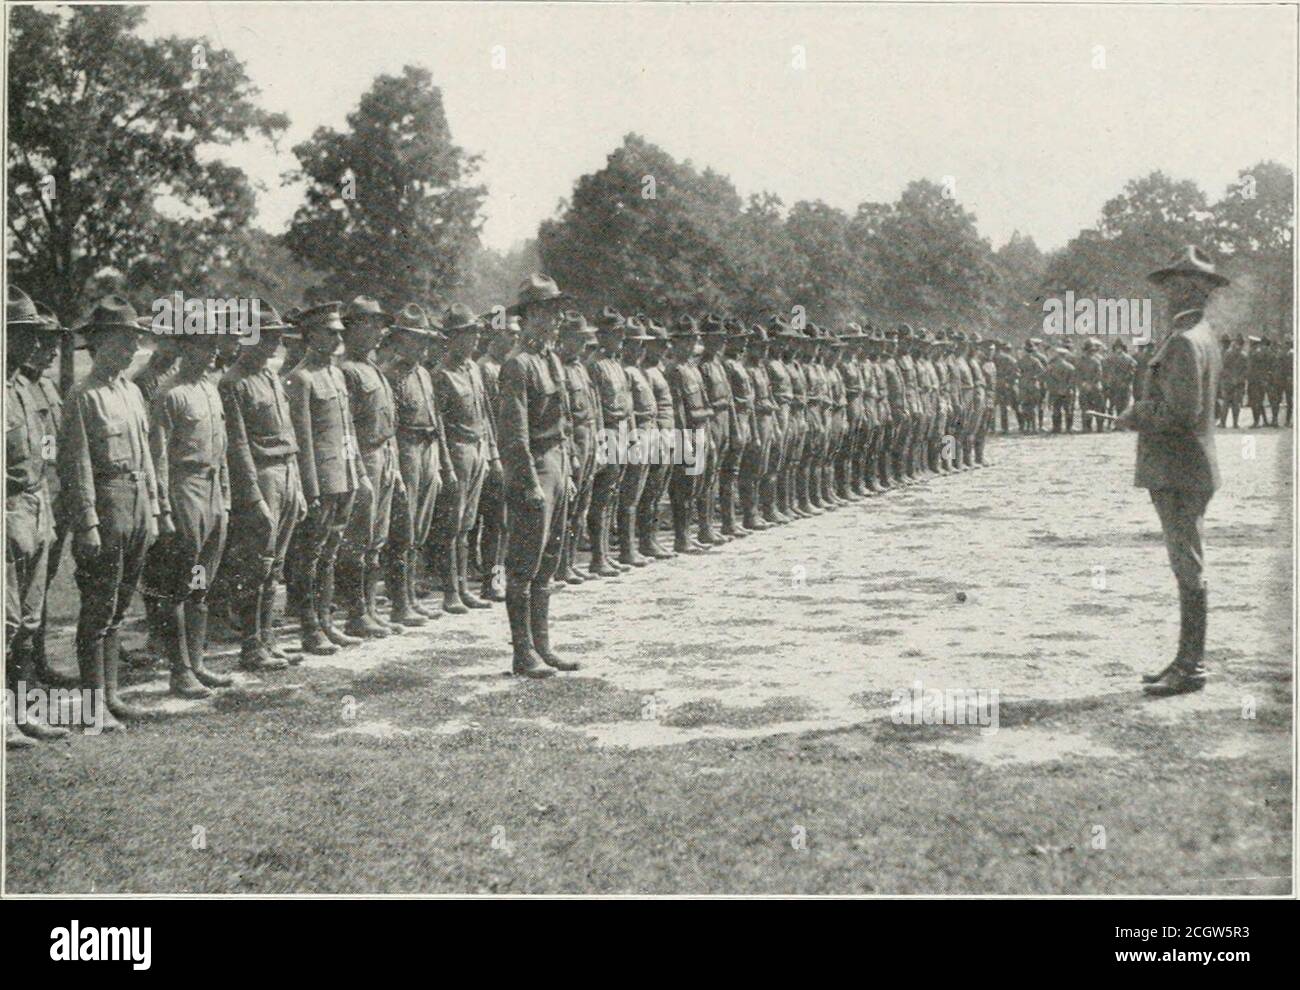 . The history and achievements of the Fort Scheridan officers' training camps . Colonel, I 1th Cavalry, commanding. The receiving line consisted of the officers and civilians on the platform. TUESDAY, AUGUST 7TH Companies 7, 8, 9, 10, Battery 3, 10th Regiment; Companies 1, 2, 3, 4,I 1 th Regiment. Presiding, Hon. John E. Wilder. On platform: Colonel, staff, speakers and commanding officers of abovenamed companies, secretary Y. M. C. A. and chaplains. Addresses, Hon. John E. Wilder, Col. William J. Nichlson, 1 1th Cavalry,commanding. Music, Madame Beriza. Receiving line consisting of occupants Stock Photo